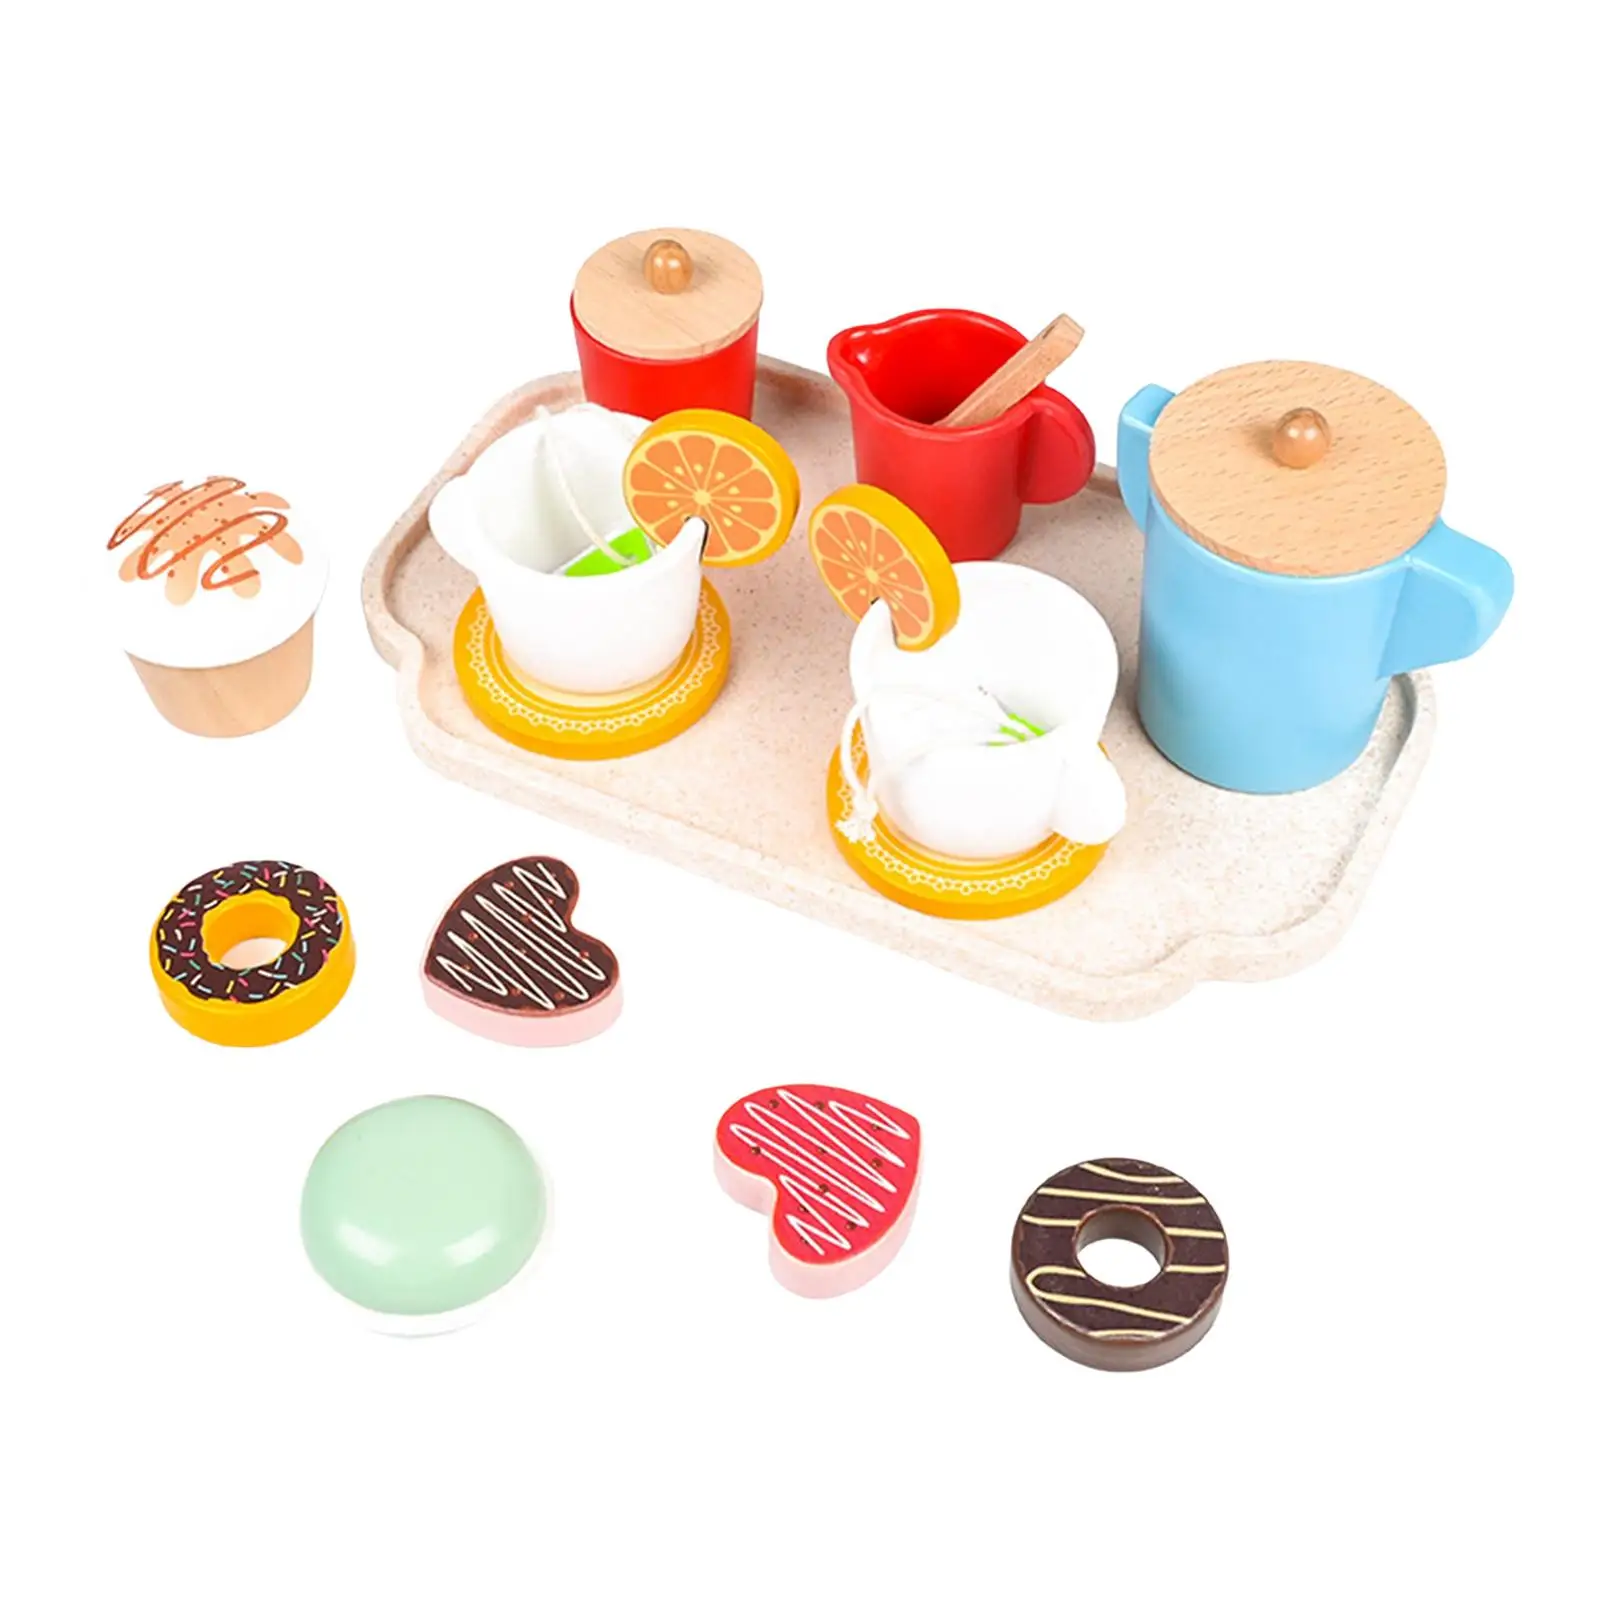 

12Pcs Kitchen Tableware Set Developmental Toy Tea Party for Toddlers Preschool Boys Girls Ages 3 4 5 Years Old Party Favors